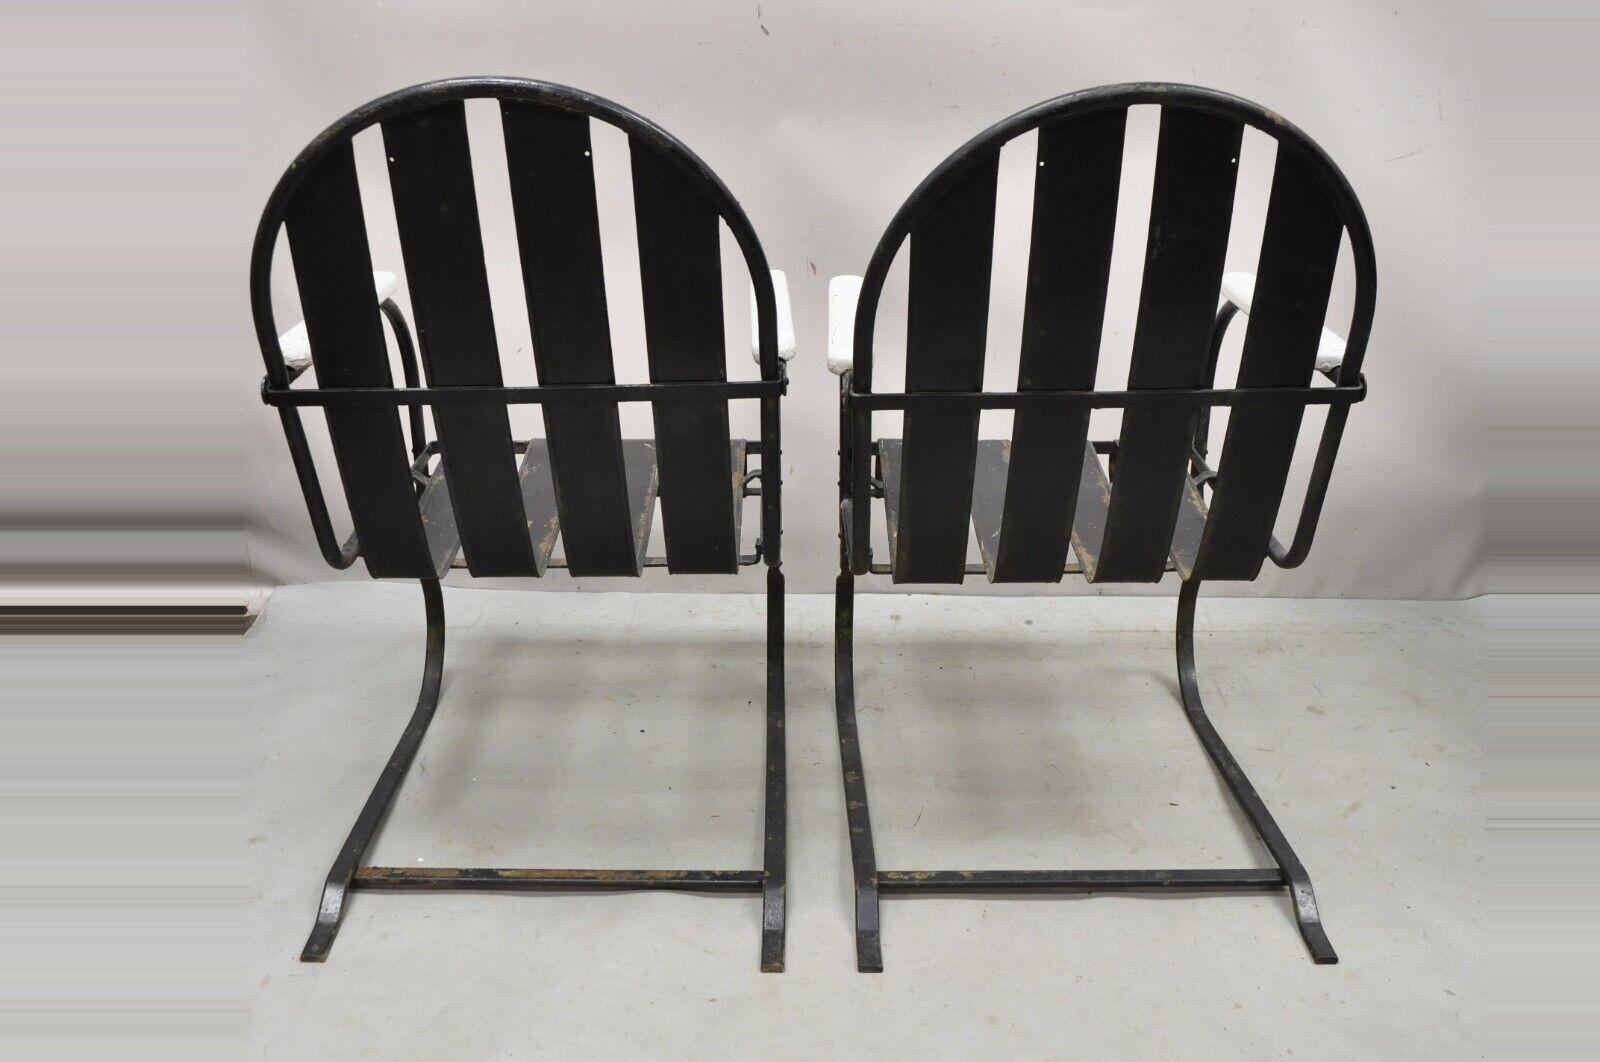 Pair Vintage Art Deco Black and White Steel Metal Slat Patio Bouncer Chairs For Sale 5